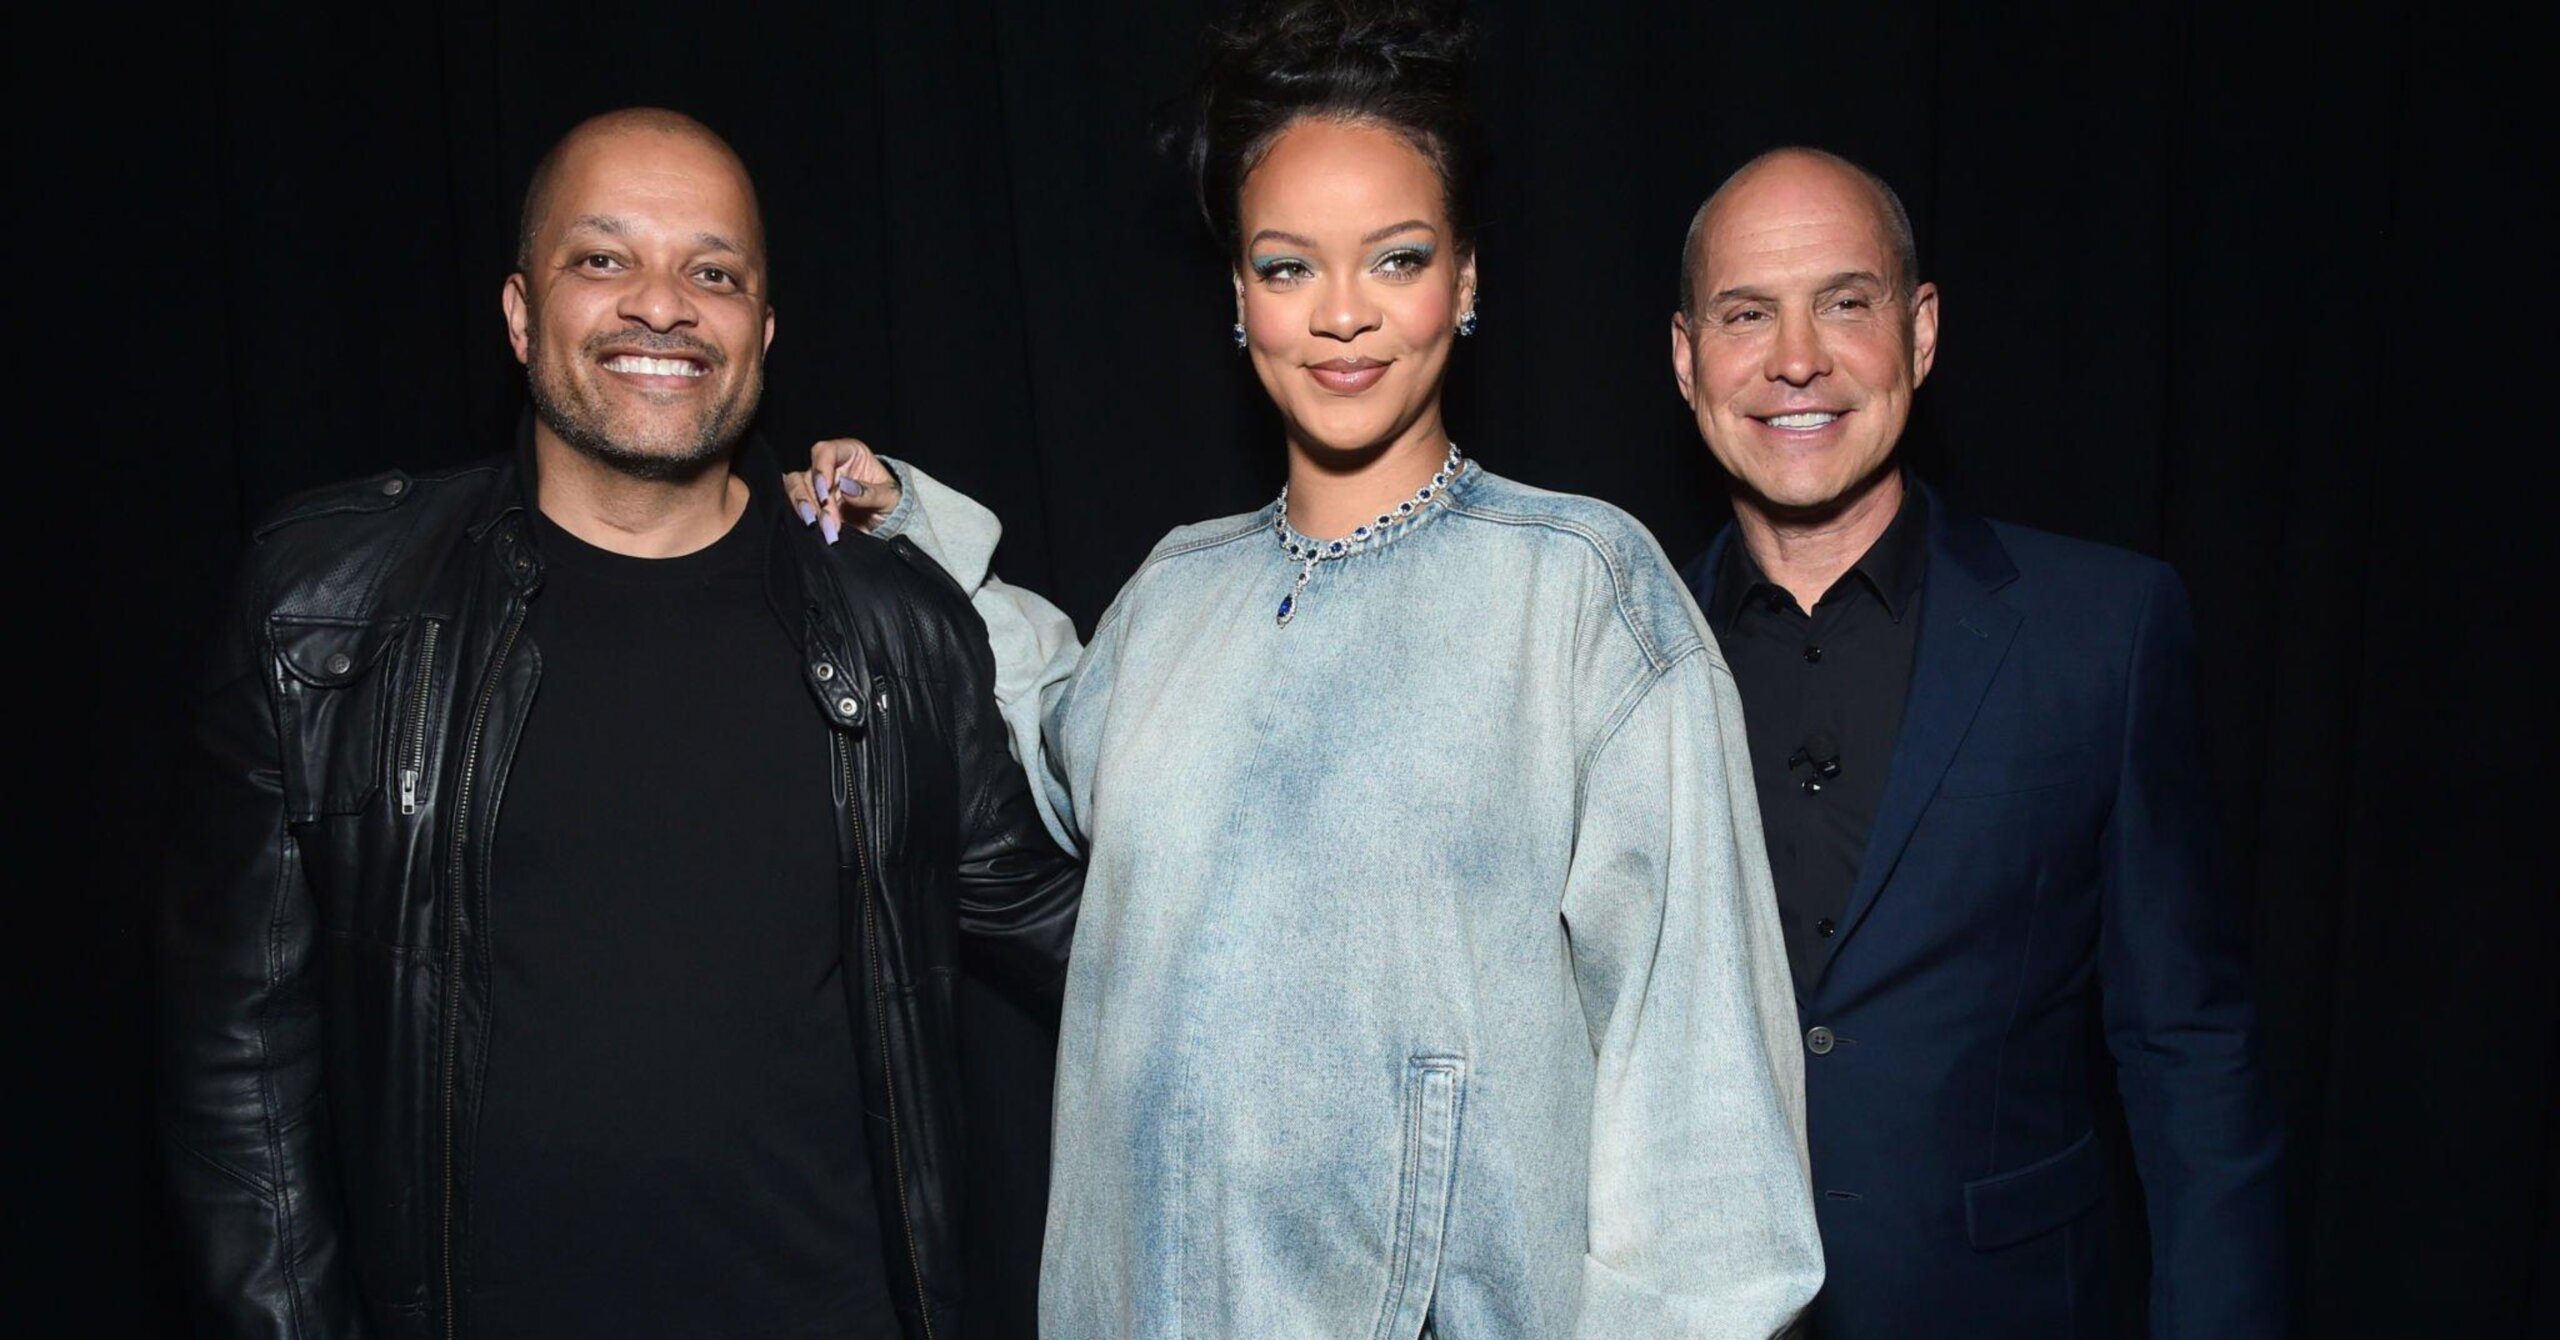 LAS VEGAS, NEVADA - APRIL 27: (L-R) Jay Brown, Rihanna and Brian Robbins, President & CEO, Paramount Pictures, pose for photos at the Paramount Pictures presentation during CinemaCon 2023, the official convention of the National Association of Theatre Owners, at Caesars Palace on April 27, 2023 in Las Vegas, Nevada. (Photo by Alberto E. Rodriguez/Getty Images for CinemaCon)